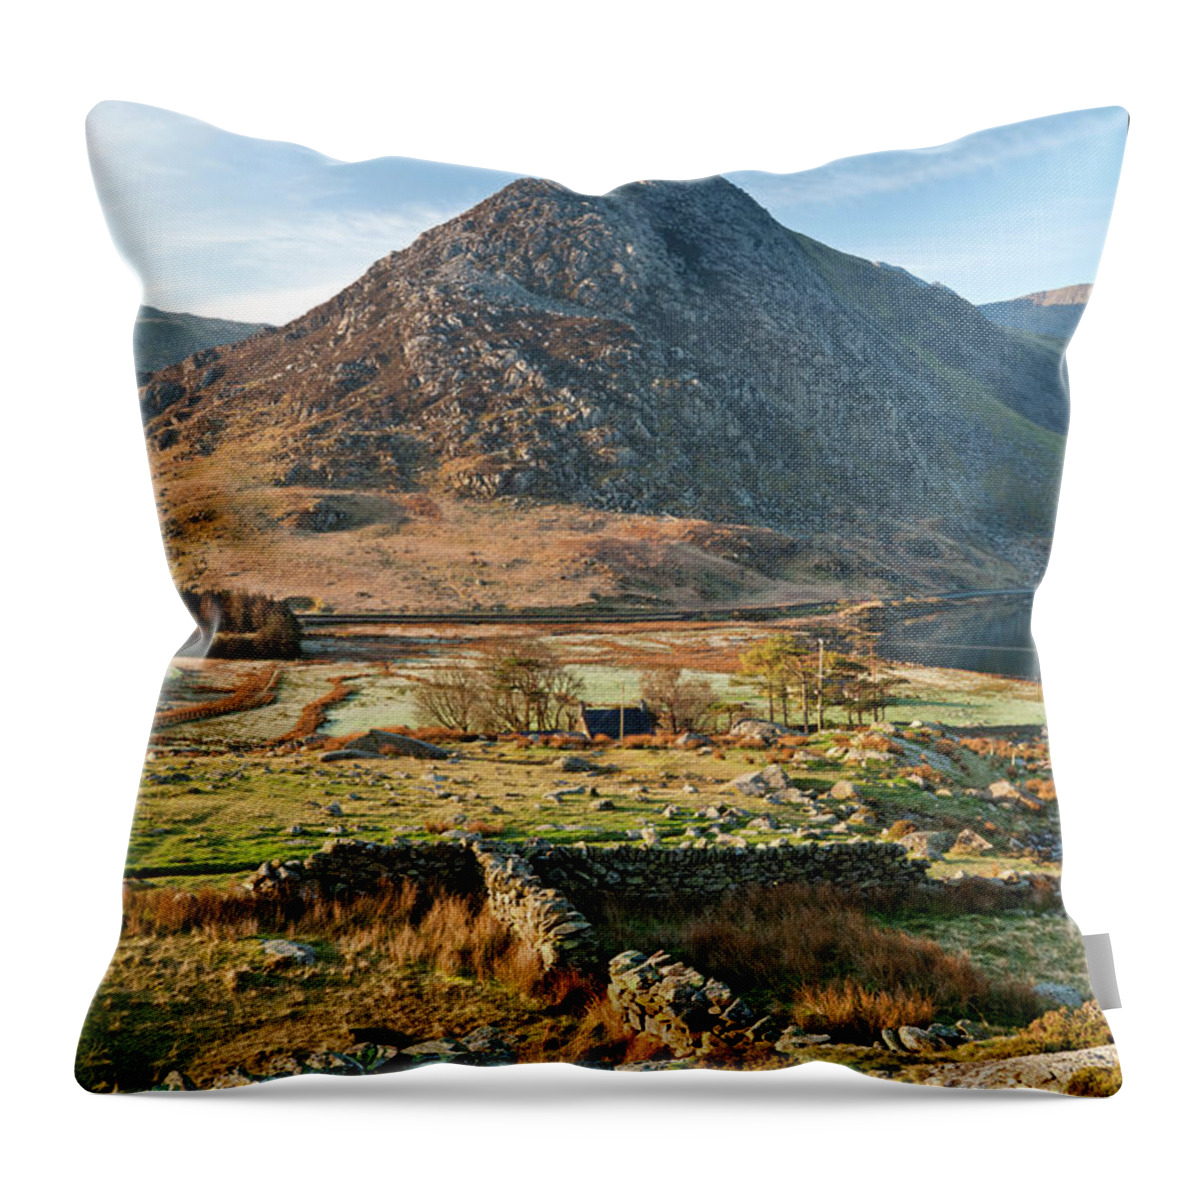 Scenics Throw Pillow featuring the photograph Peak Of Tryfan, The Glyderau by Alan Novelli